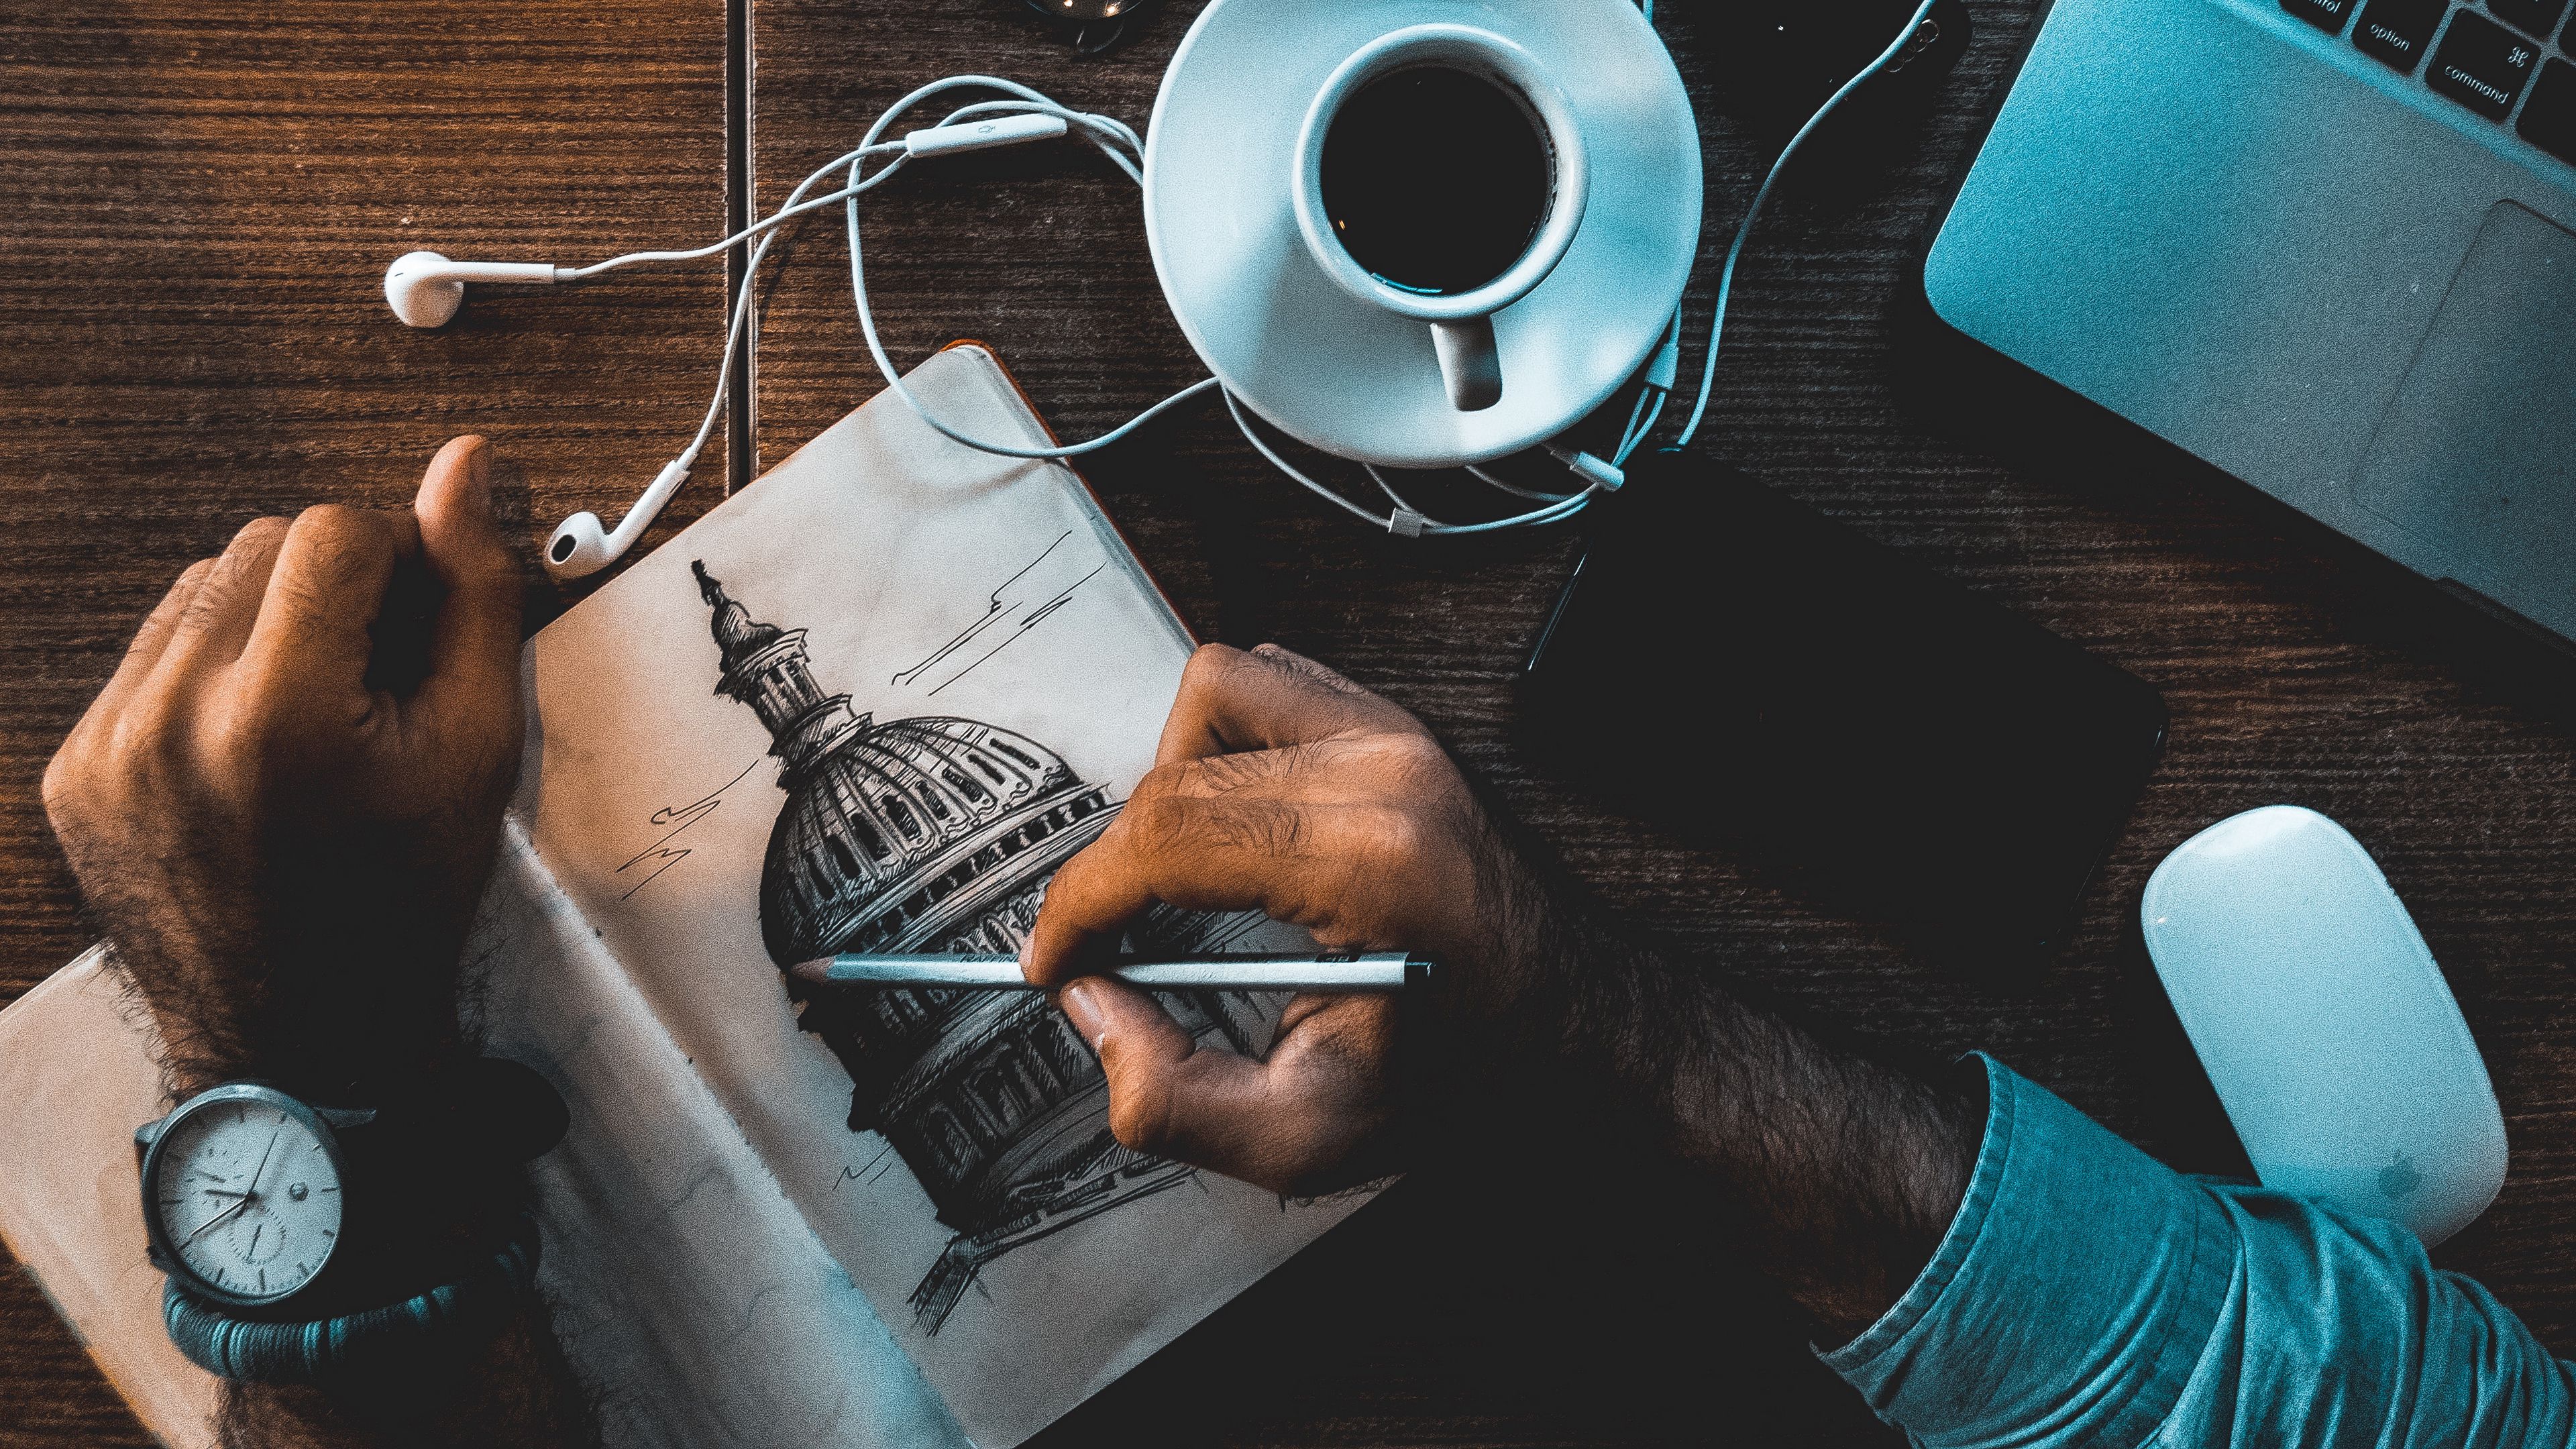 Download wallpaper 3840x2160 sketch, drawing, headphones, cup, table 4k uhd 16:9 HD background